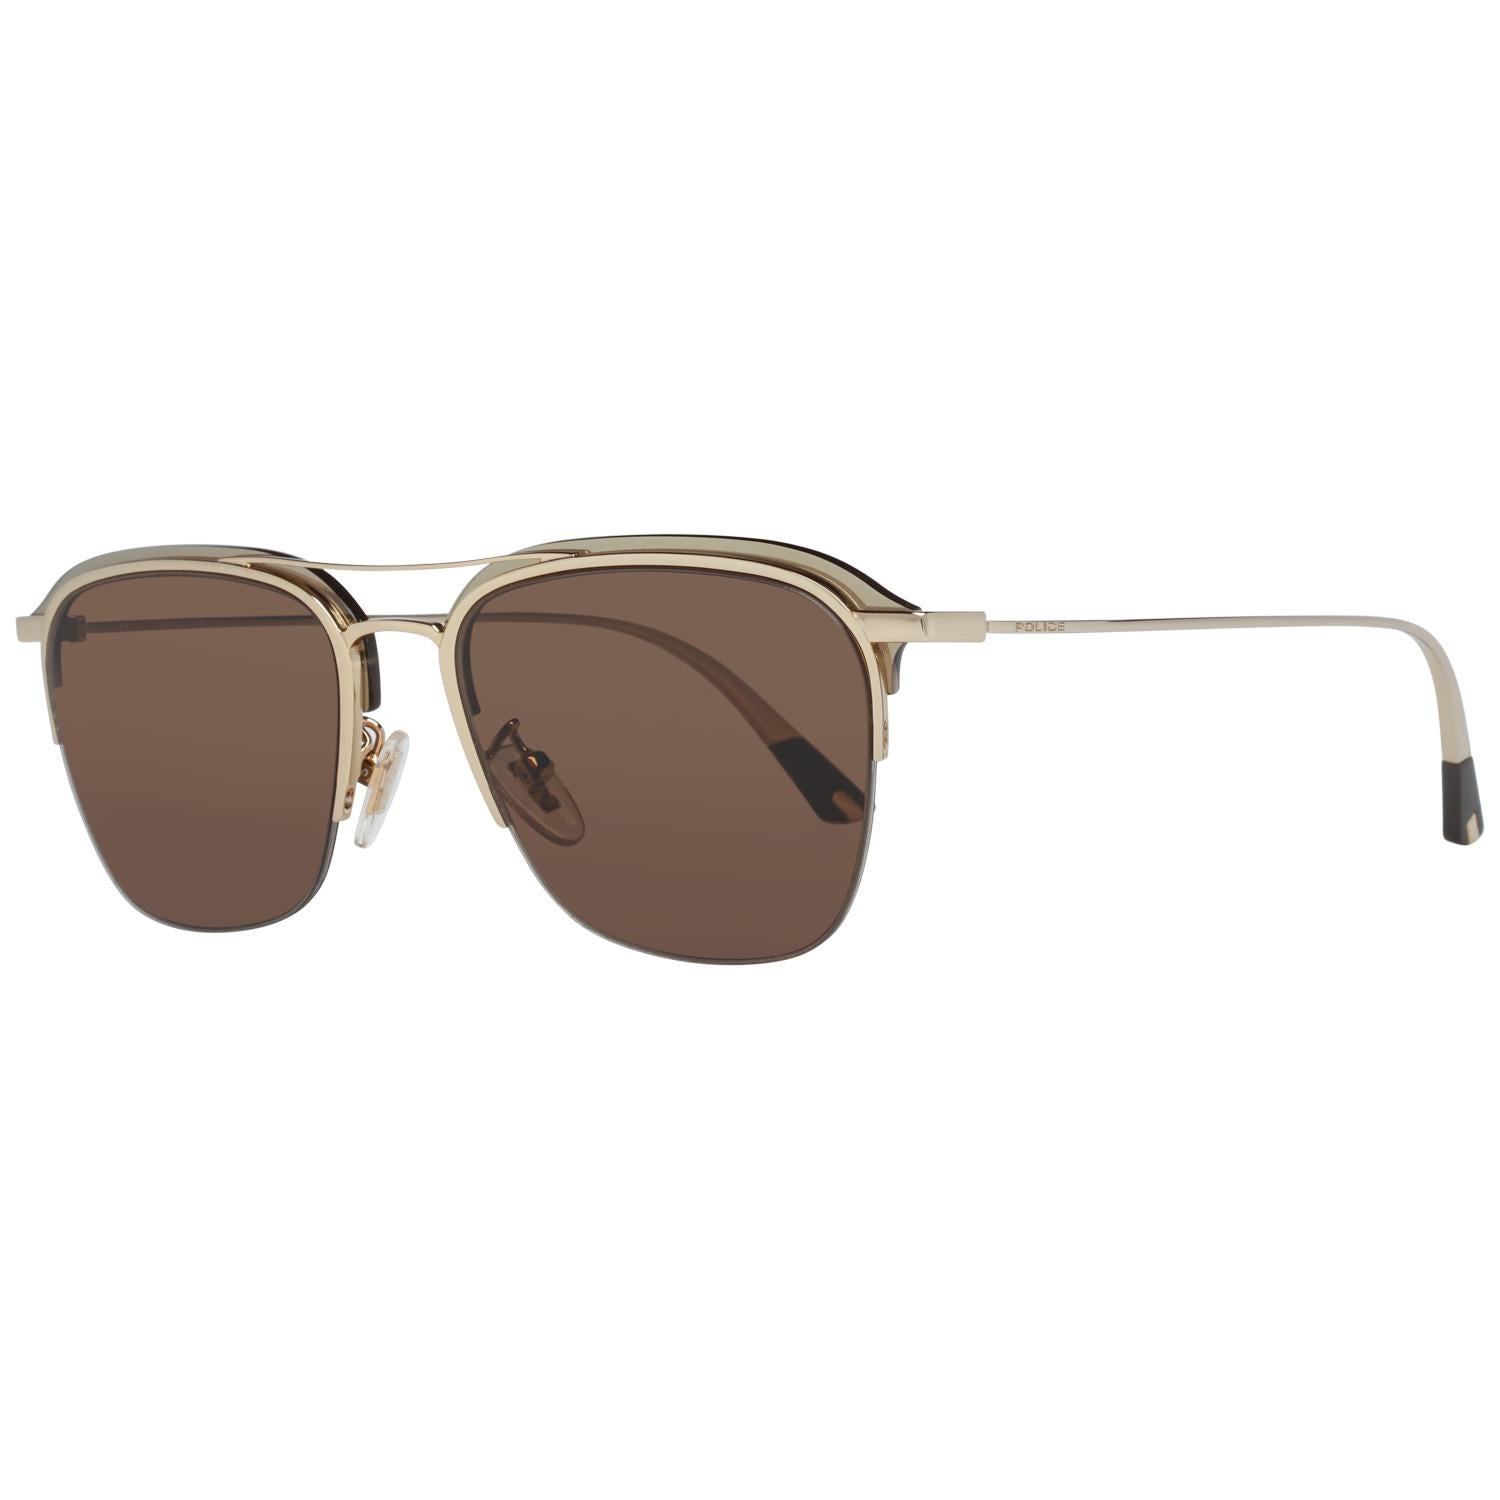 Details
MATERIAL: Metal
COLOR: Gold
MODEL: SPL783 540300
GENDER: Adult Unisex
COUNTRY OF MANUFACTURE: China
TYPE: Sunglasses
ORIGINAL CASE?: Yes
STYLE: Rectangle
OCCASION: Casual
FEATURES: Lightweight
LENS COLOR: Brown
LENS TECHNOLOGY: No Extra
YEAR